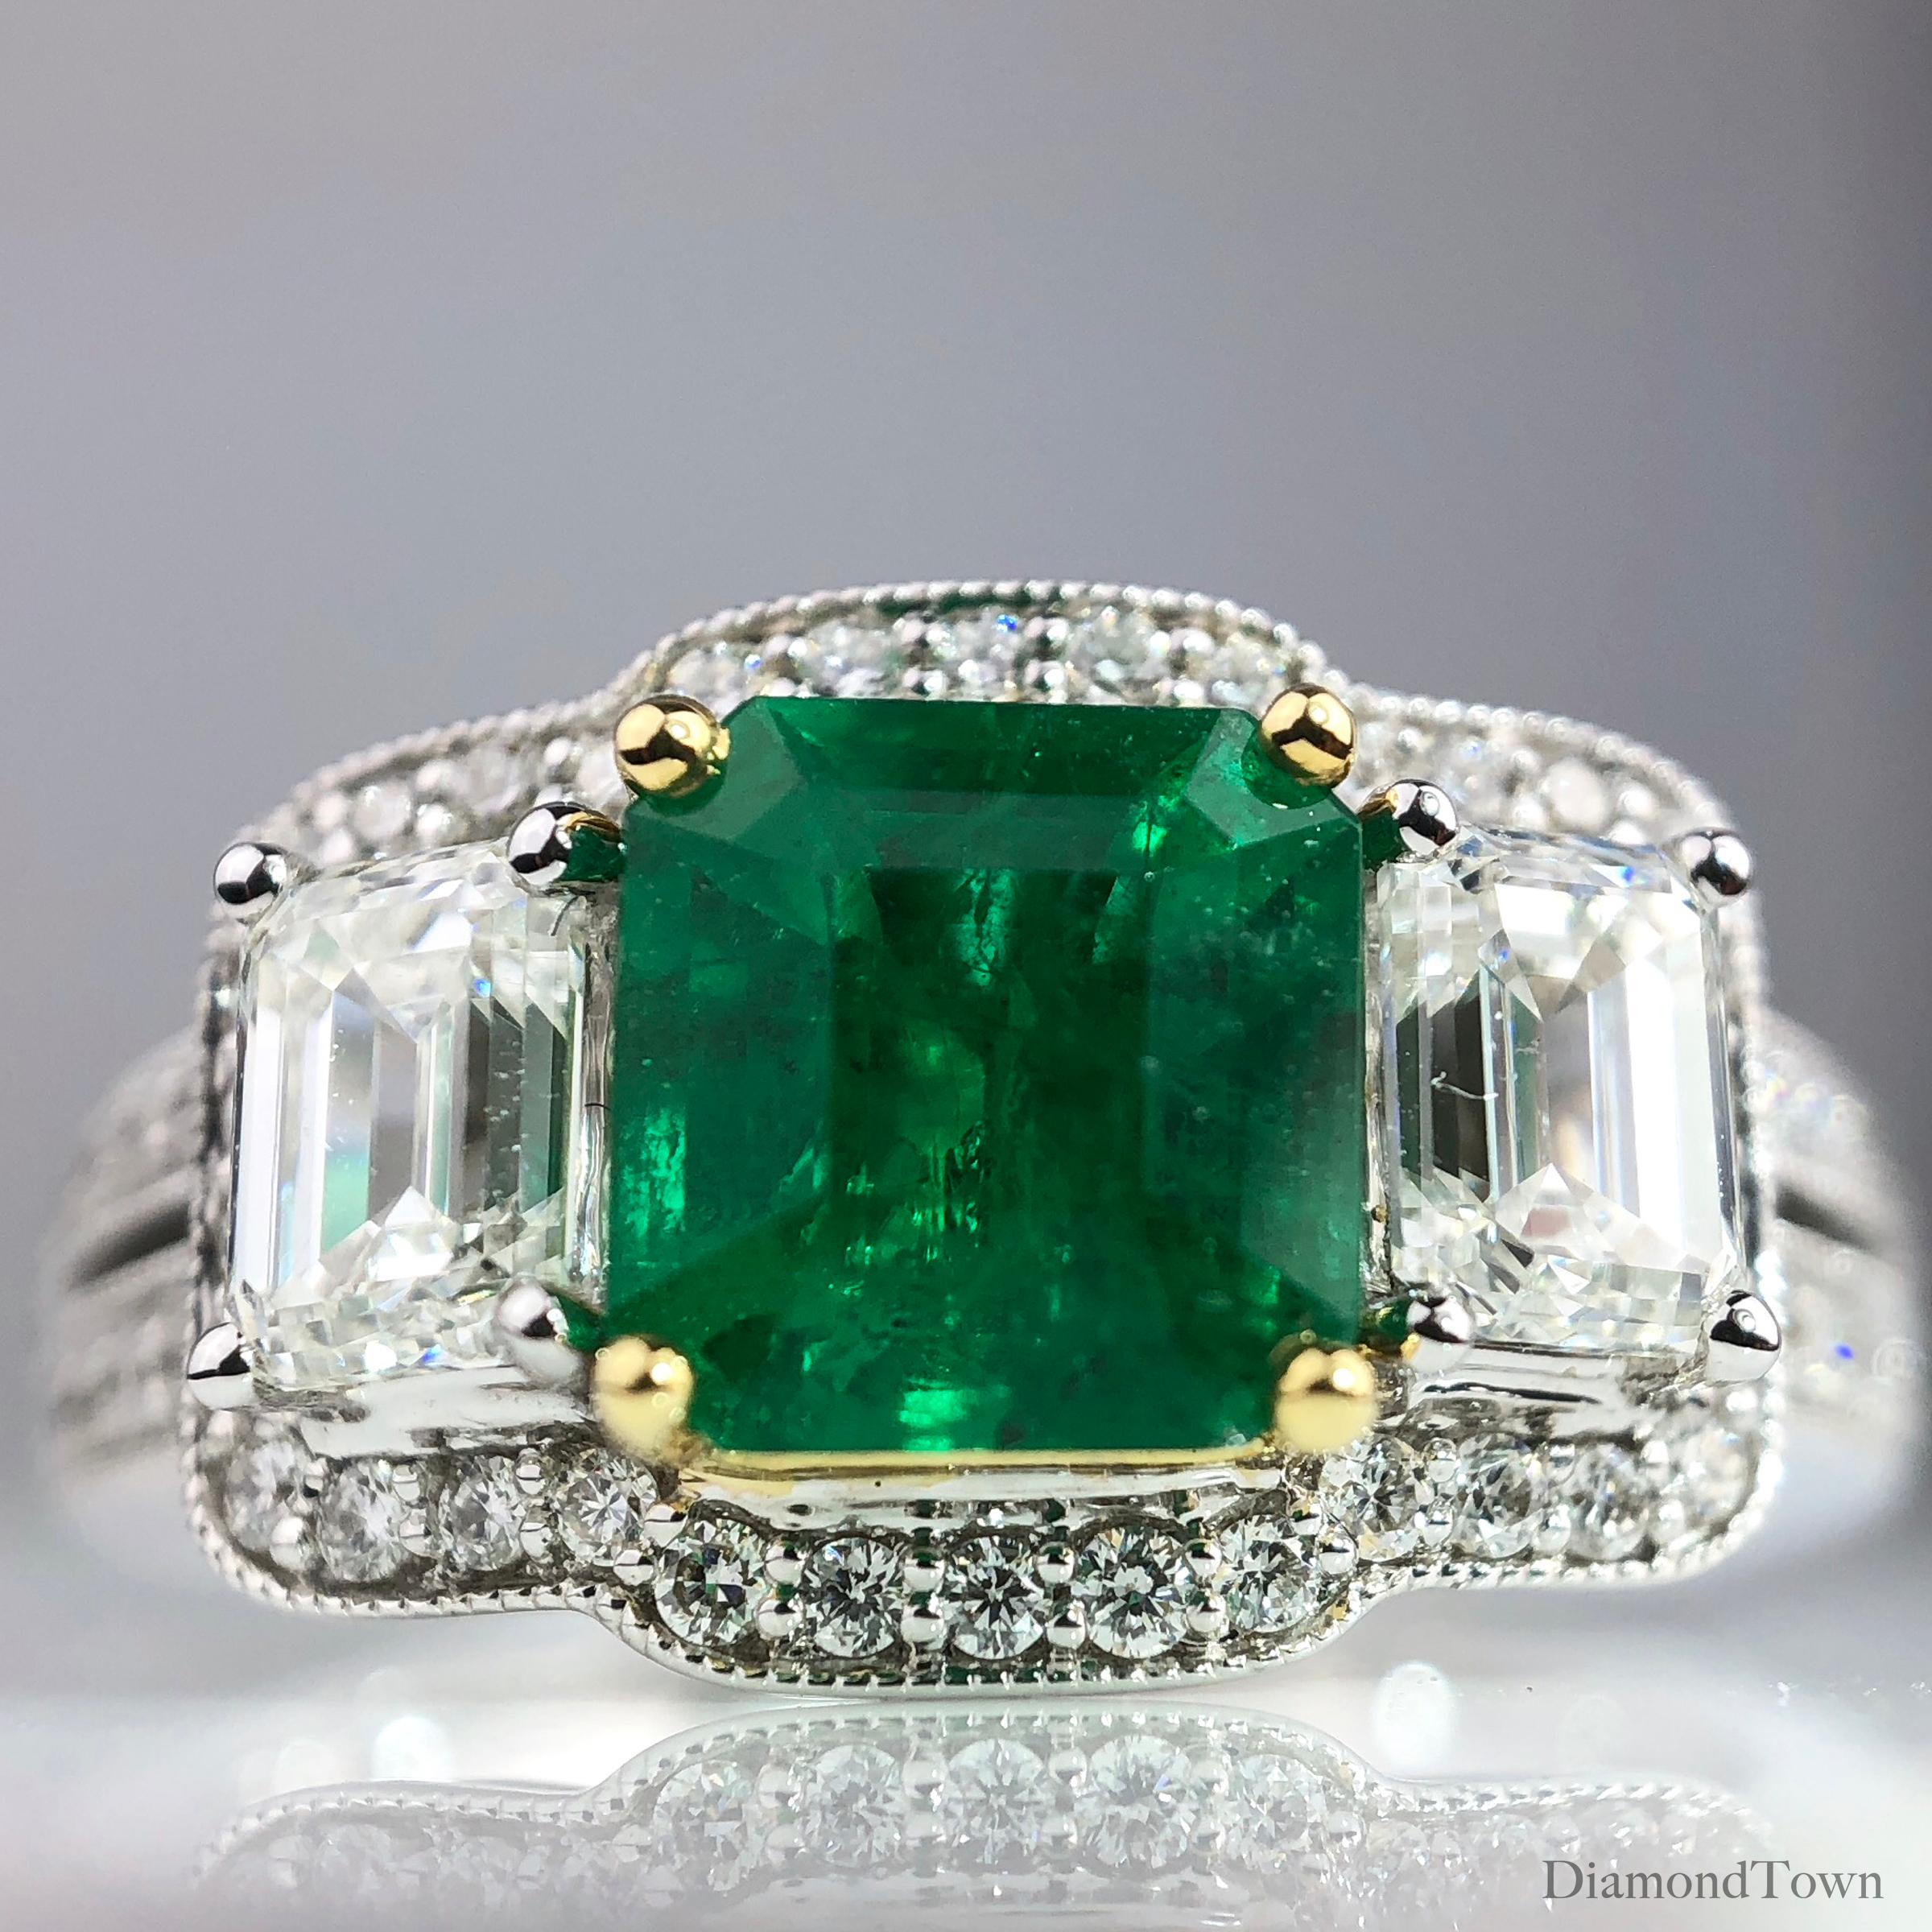 1.10 Carat Cushion Cut Emerald and 1.03 Carat Natural Diamond Ring in 18K ref942 In New Condition For Sale In New York, NY